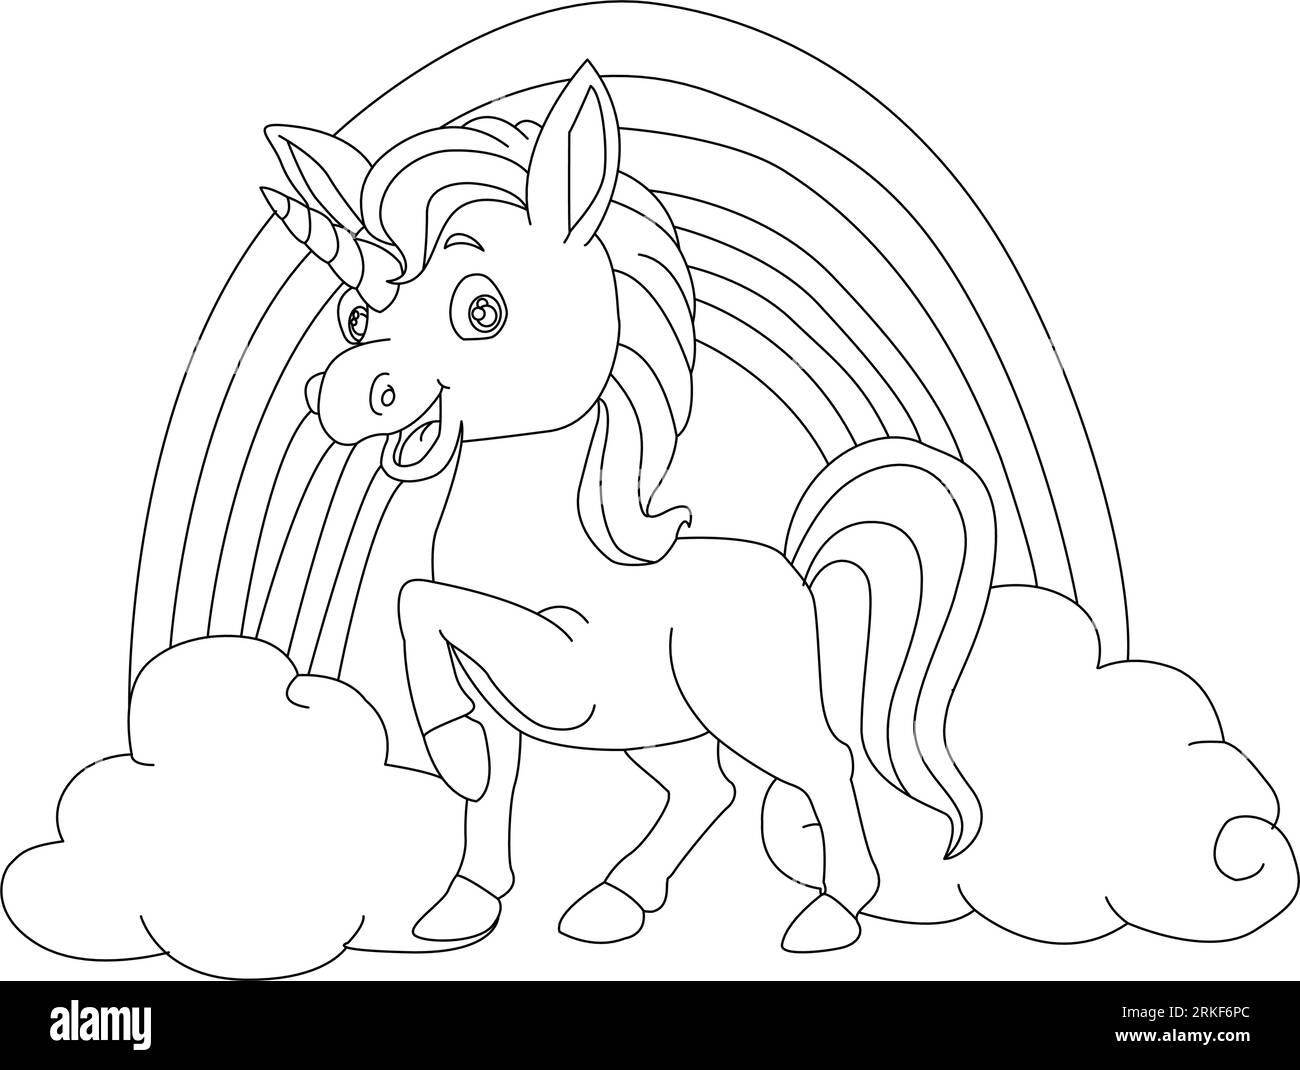 Dive into the World of Unicorn Coloring Book Magic, Fantastic animal. Black and white, linear, image. For the design of coloring books, prints, poste Stock Vector